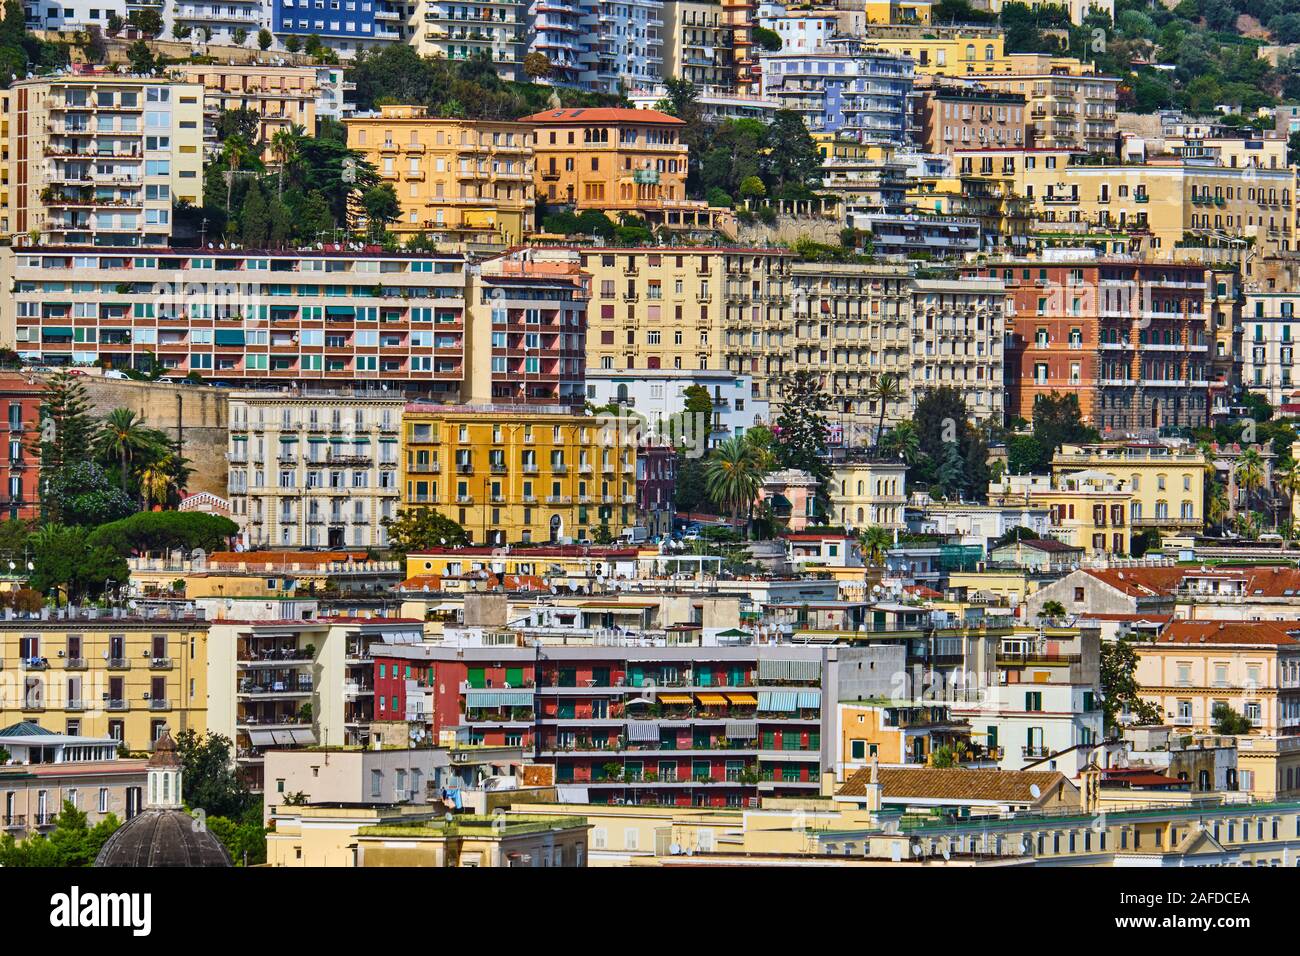 Colorful residential zone with high-rise apartment houses in Naples, Italy Stock Photo